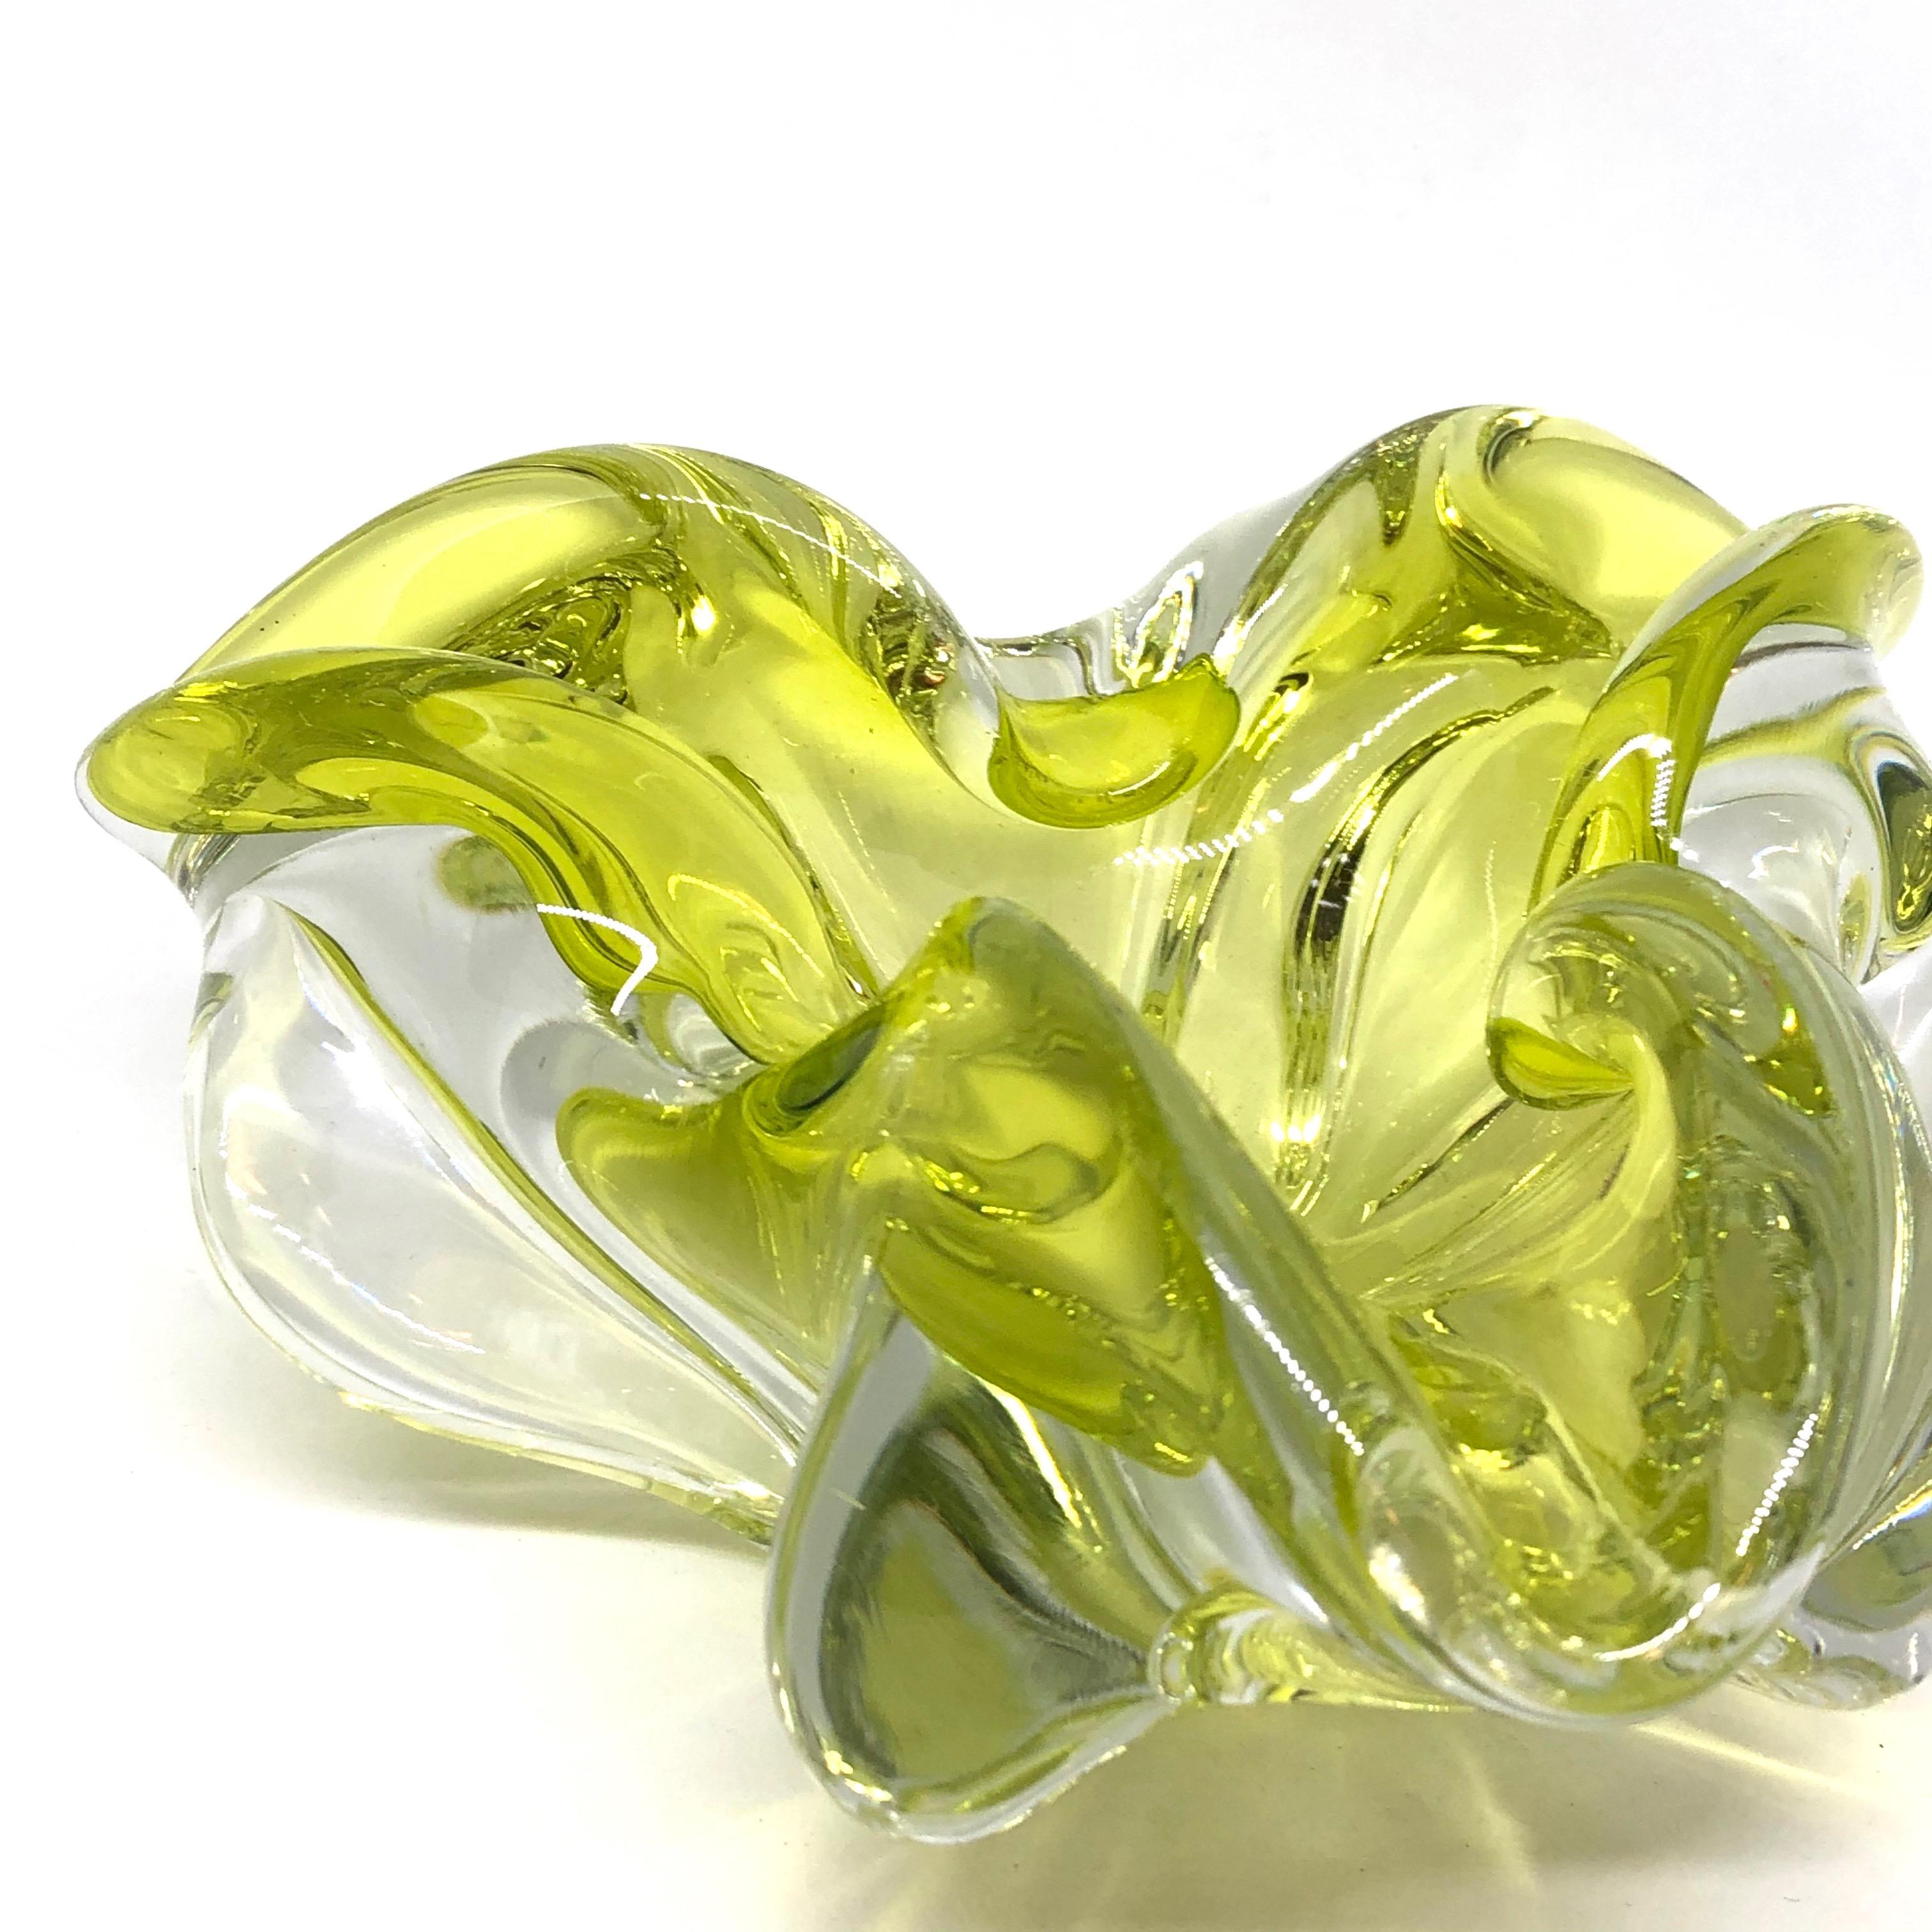 Italian Murano Art Glass Lime Green and Clear Bowl Catchall Italy, Sommerso, 1970s For Sale